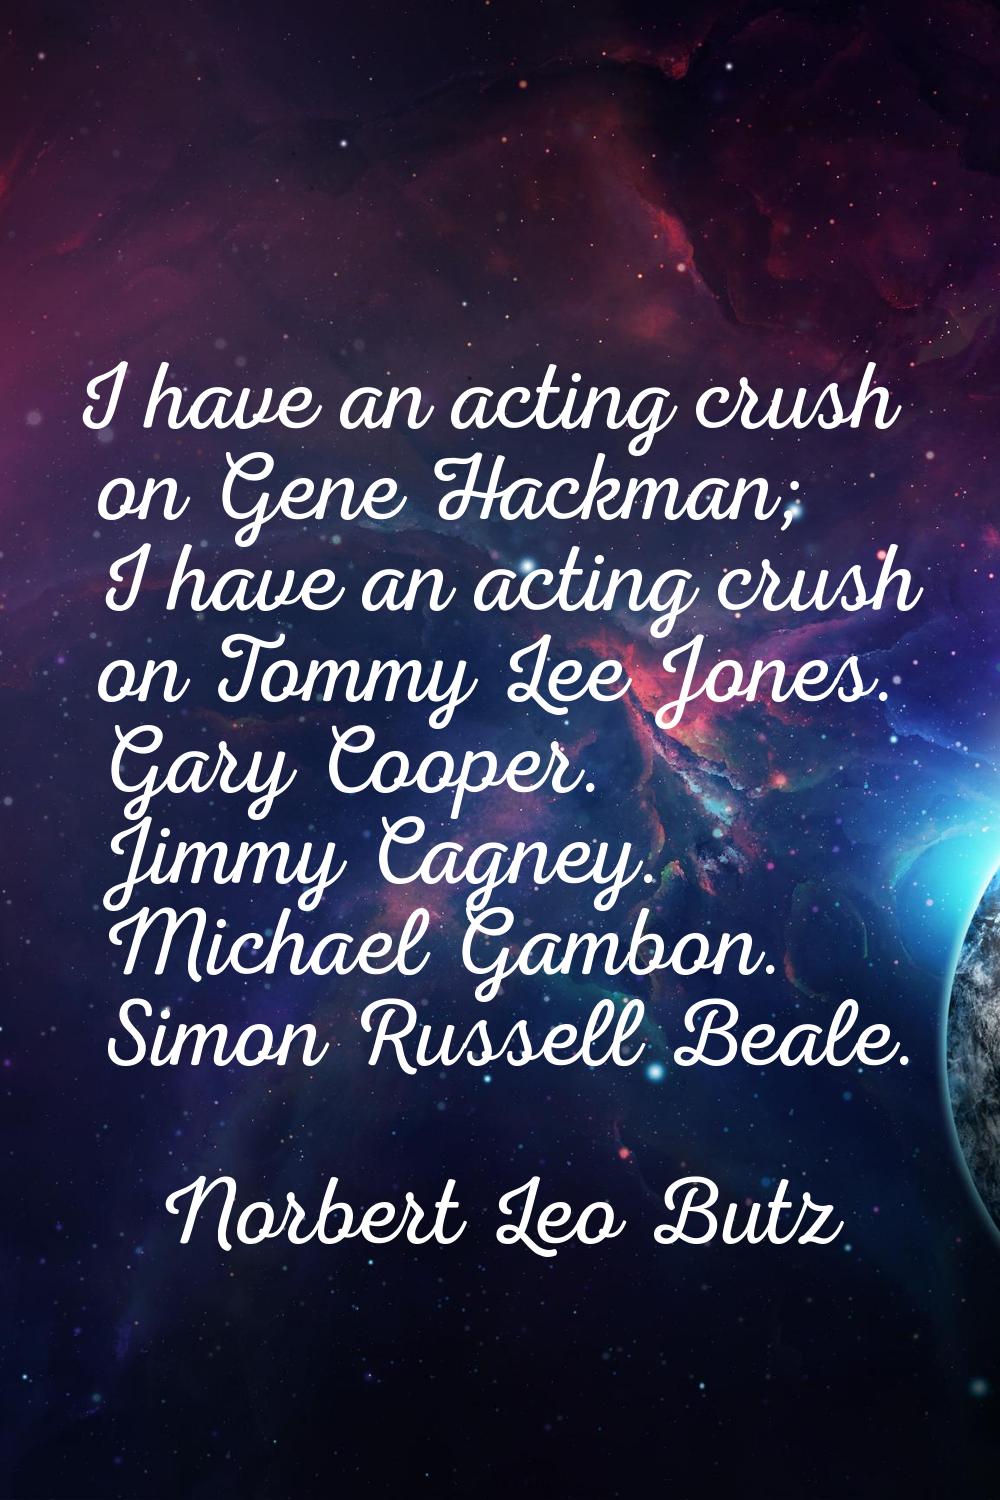 I have an acting crush on Gene Hackman; I have an acting crush on Tommy Lee Jones. Gary Cooper. Jim